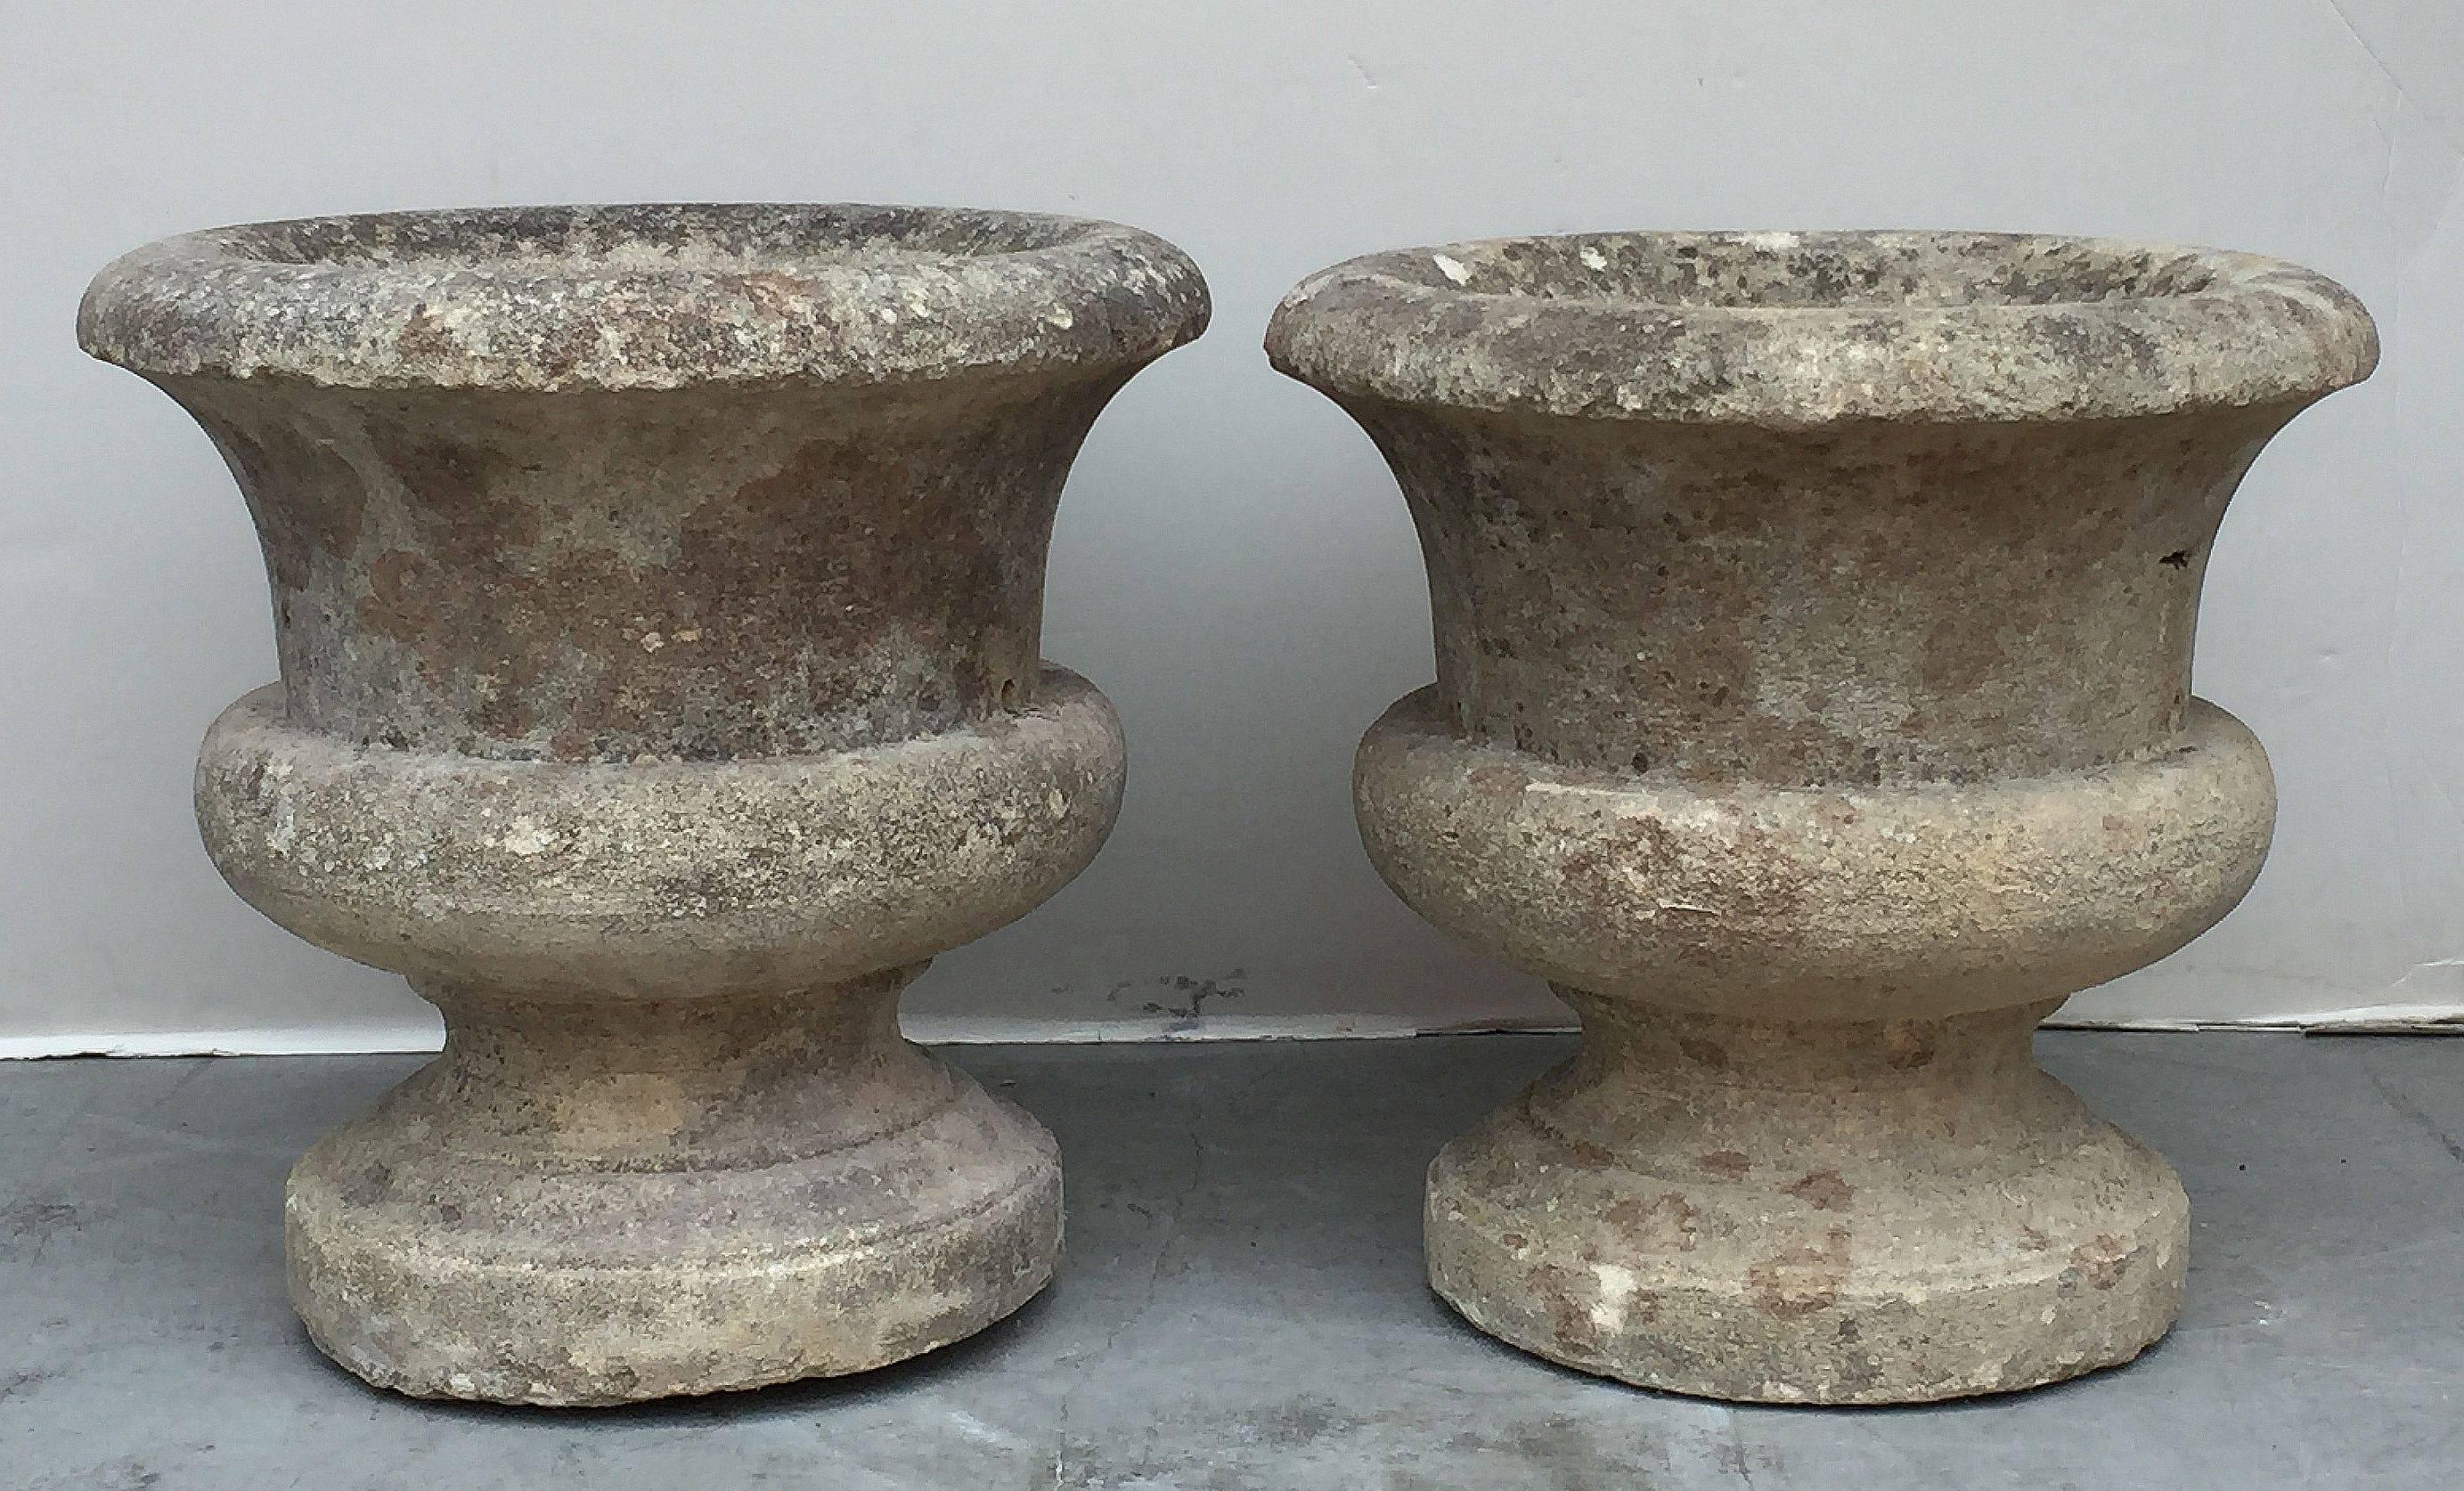 A fine pair of large French round garden planters or pots, each featuring a flared opening around the circumferences at the mid-level and the bottom, set upon a raised base.

Individually priced - $2295 each planter

Perfect for a garden room or